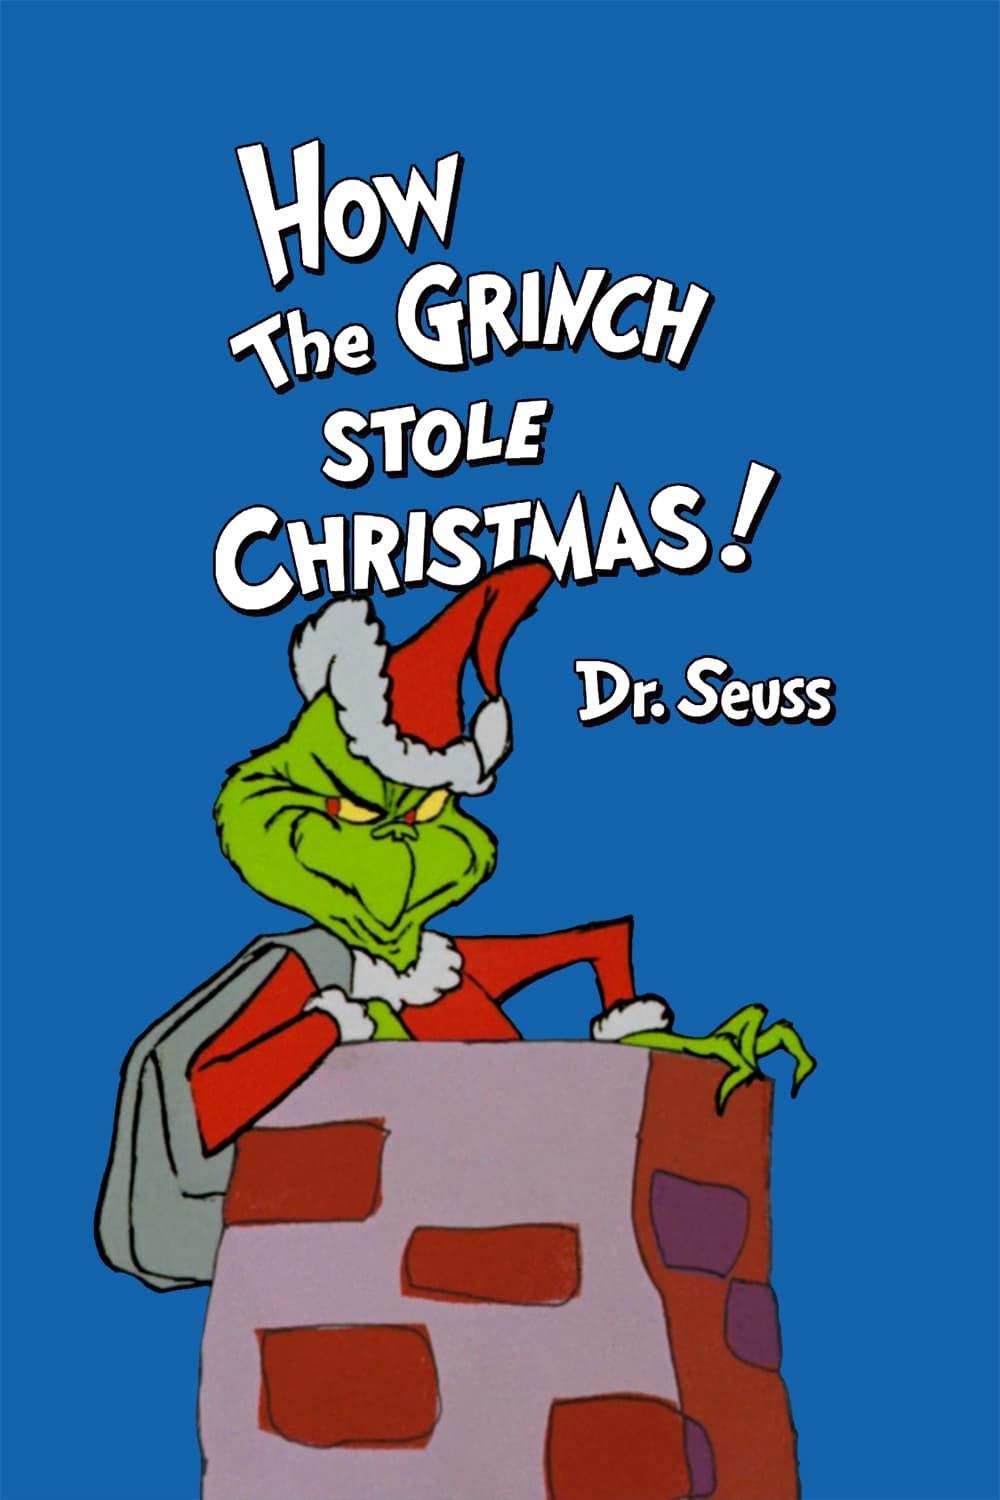 How the Grinch Stole Christmas! poster